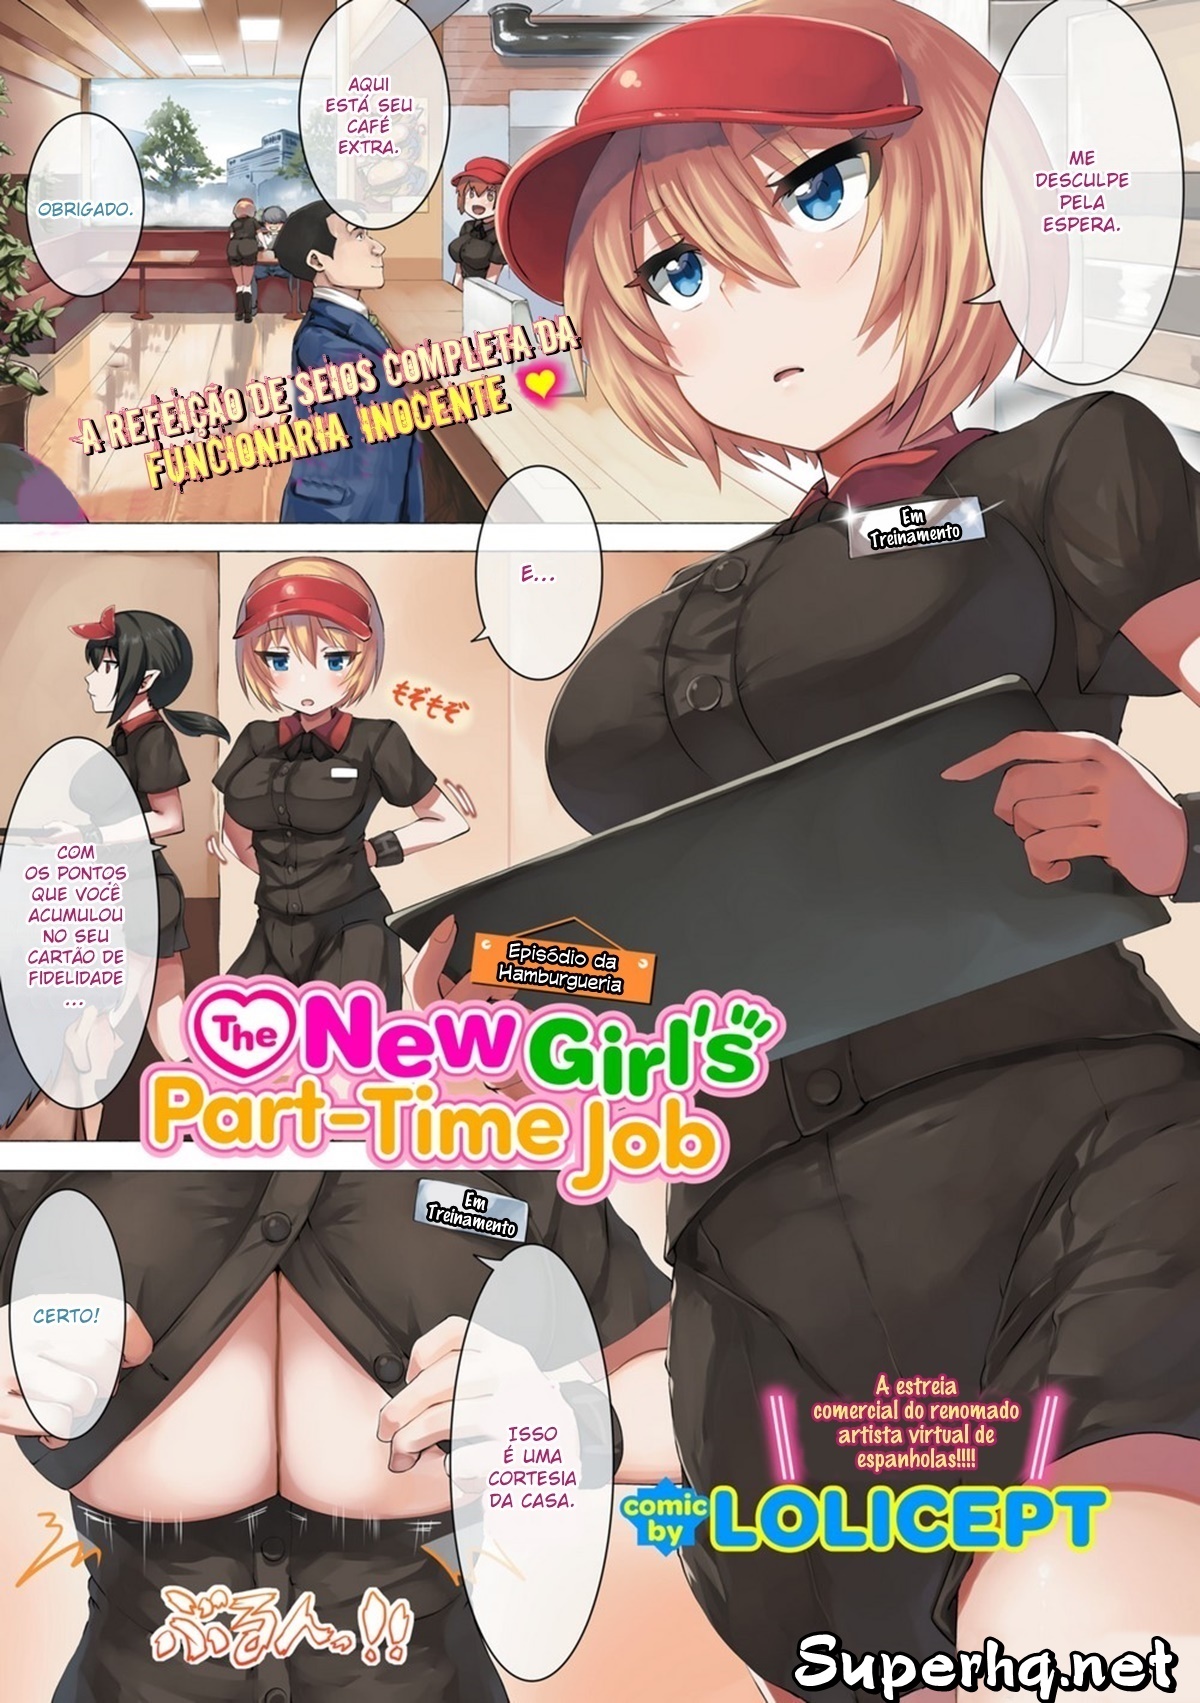 The New Girl’s Part-Time Job - 2